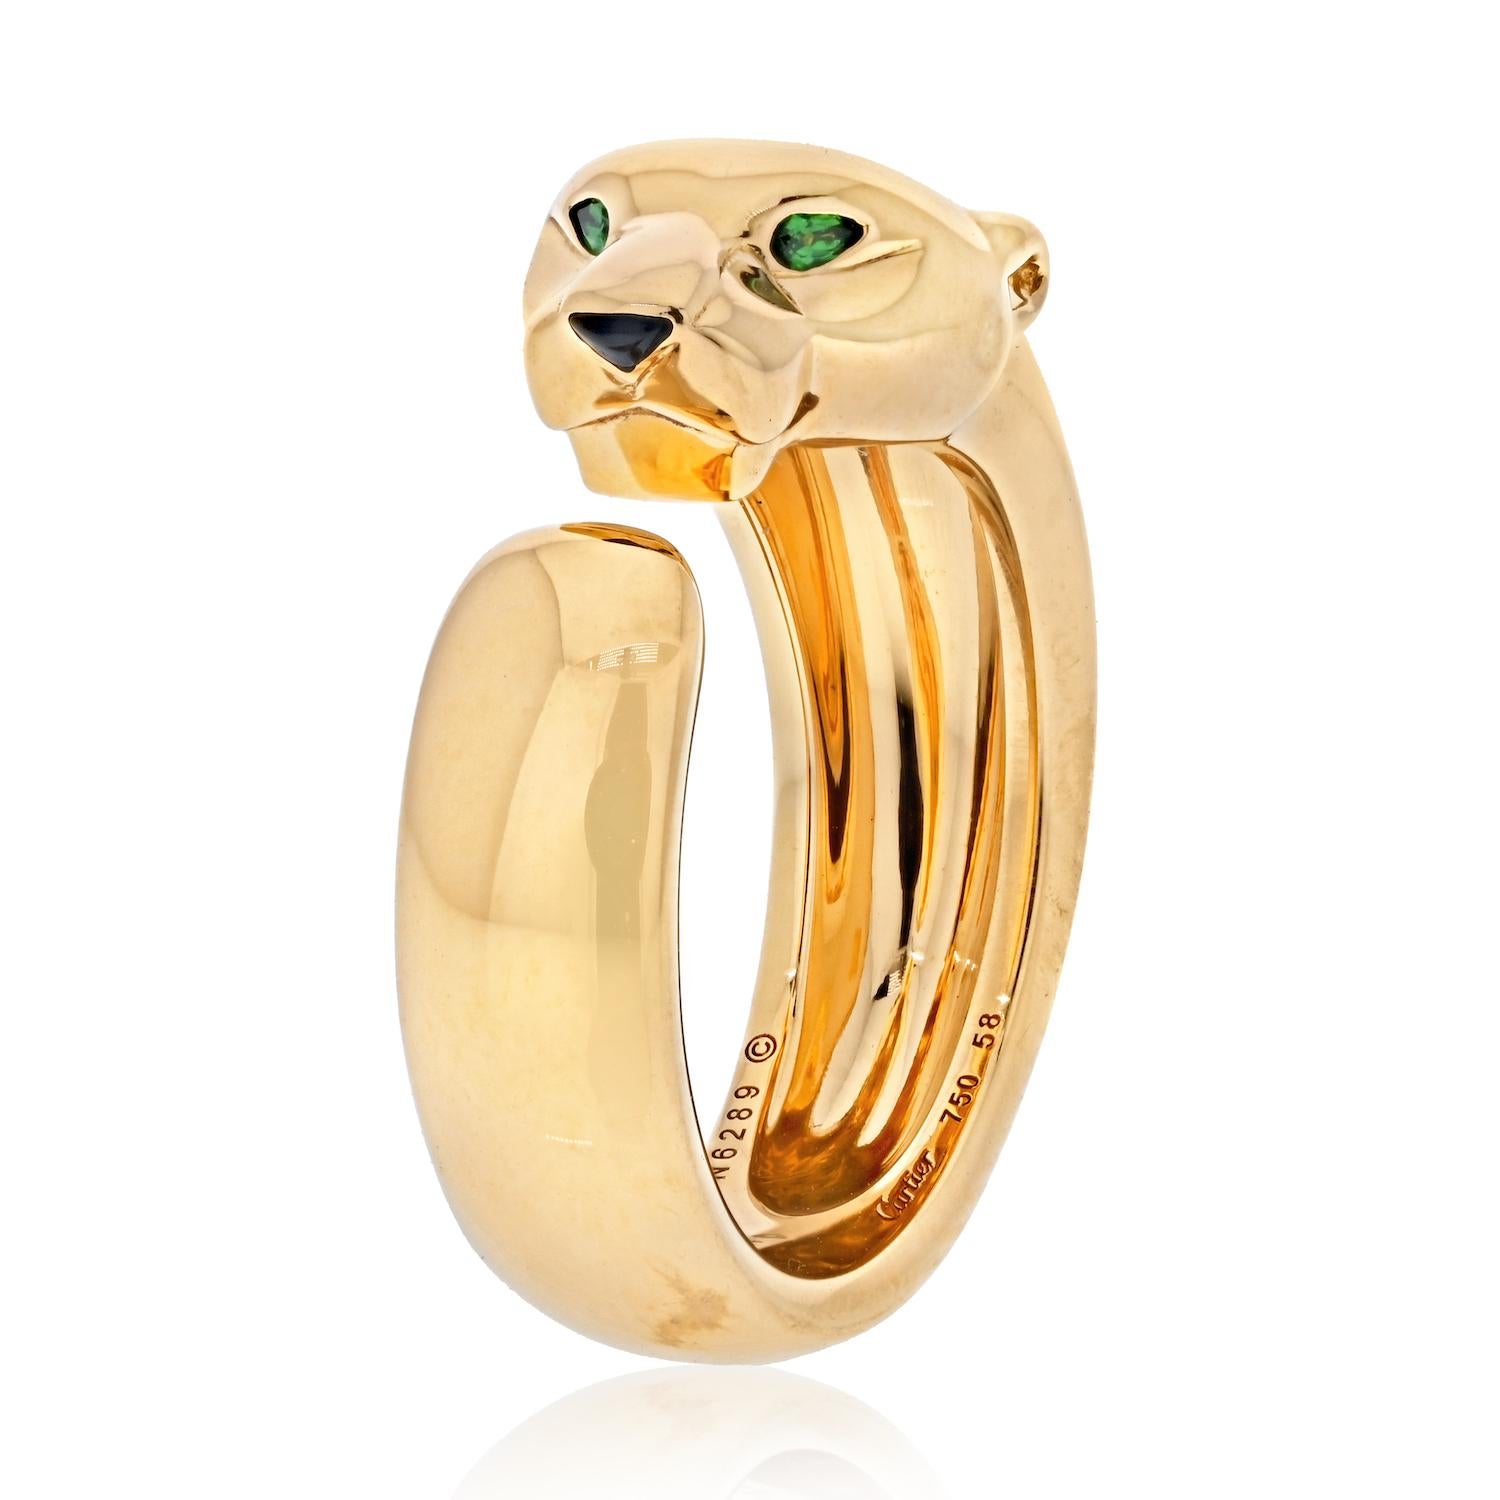 The Cartier 18K Yellow Gold Panthère de Cartier Ring is a stunning and versatile piece that seamlessly combines luxury with everyday wearability. Let's delve into the details:

**Design:**
- **Panthère Motif:**
  The ring features the iconic